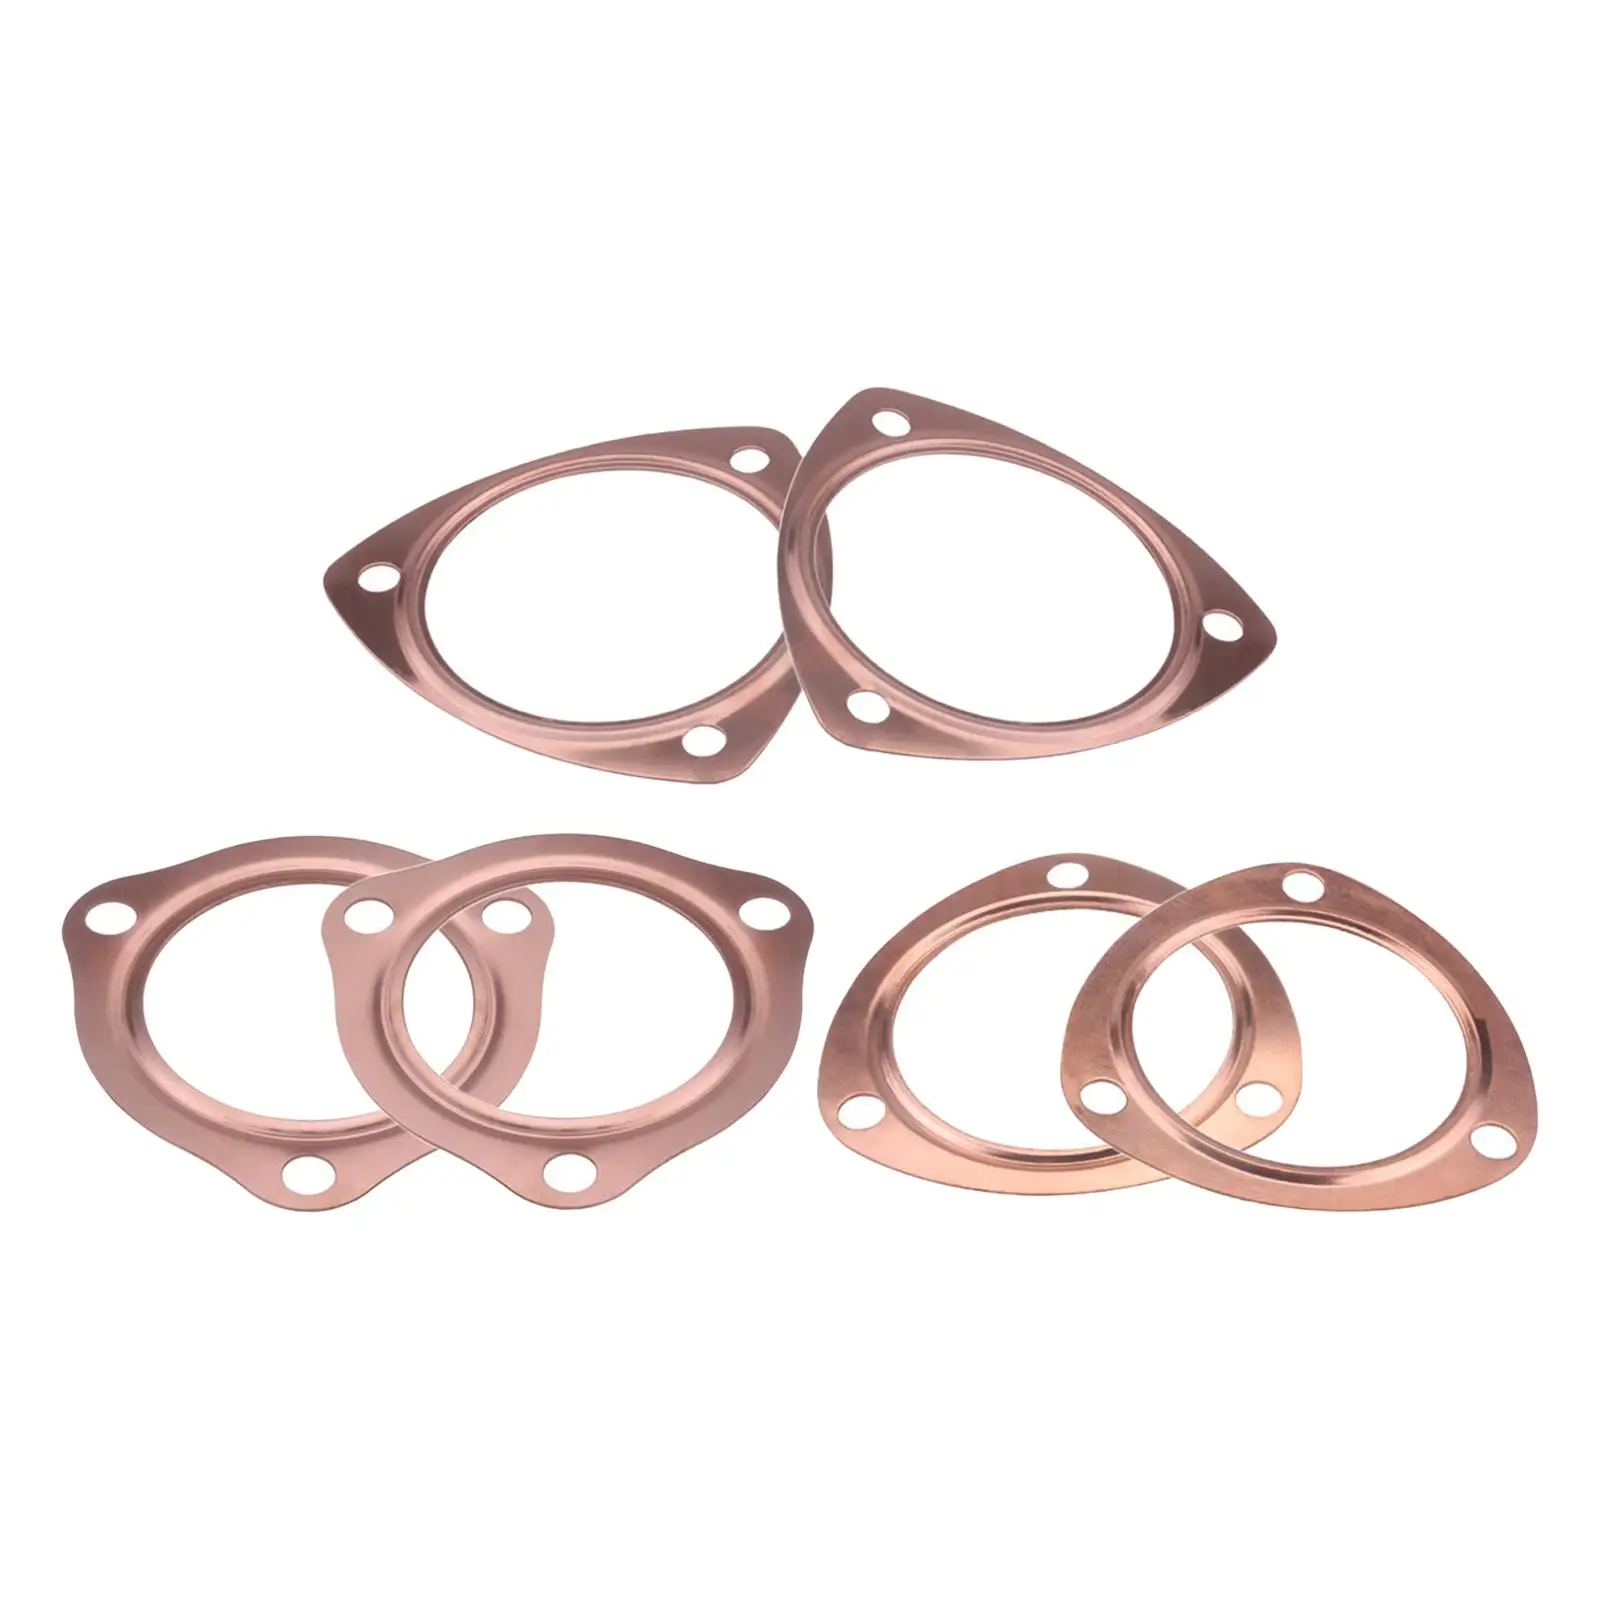 Copper Collector Gasket Copper Header Exhaust Collector Gaskets for Sbc 302 350 454